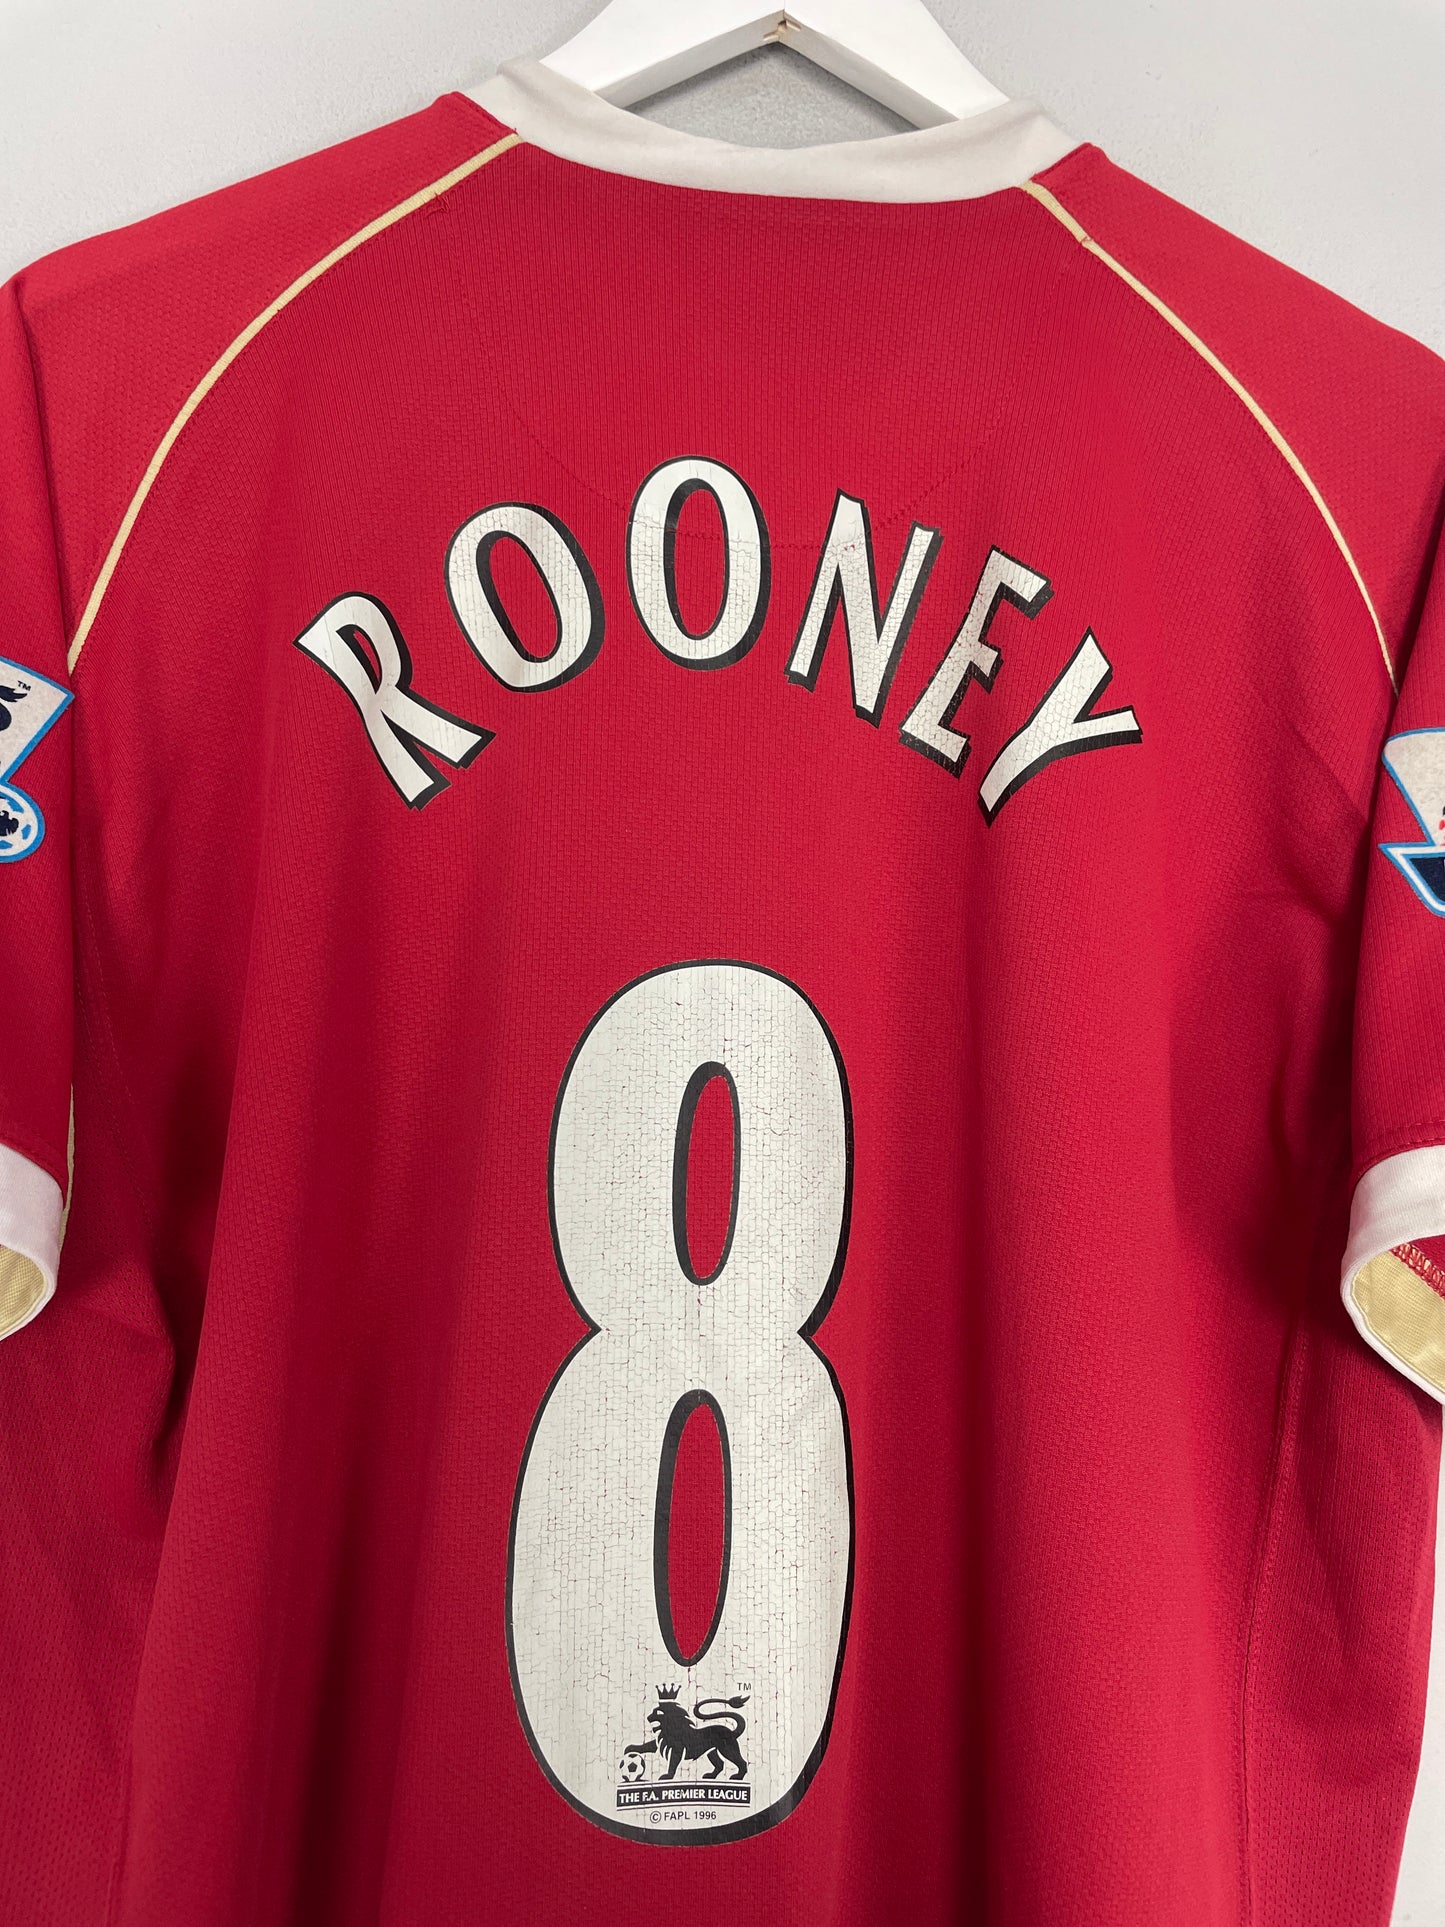 2006/07 MANCHESTER UNITED ROONEY #8 HOME SHIRT (M) NIKE